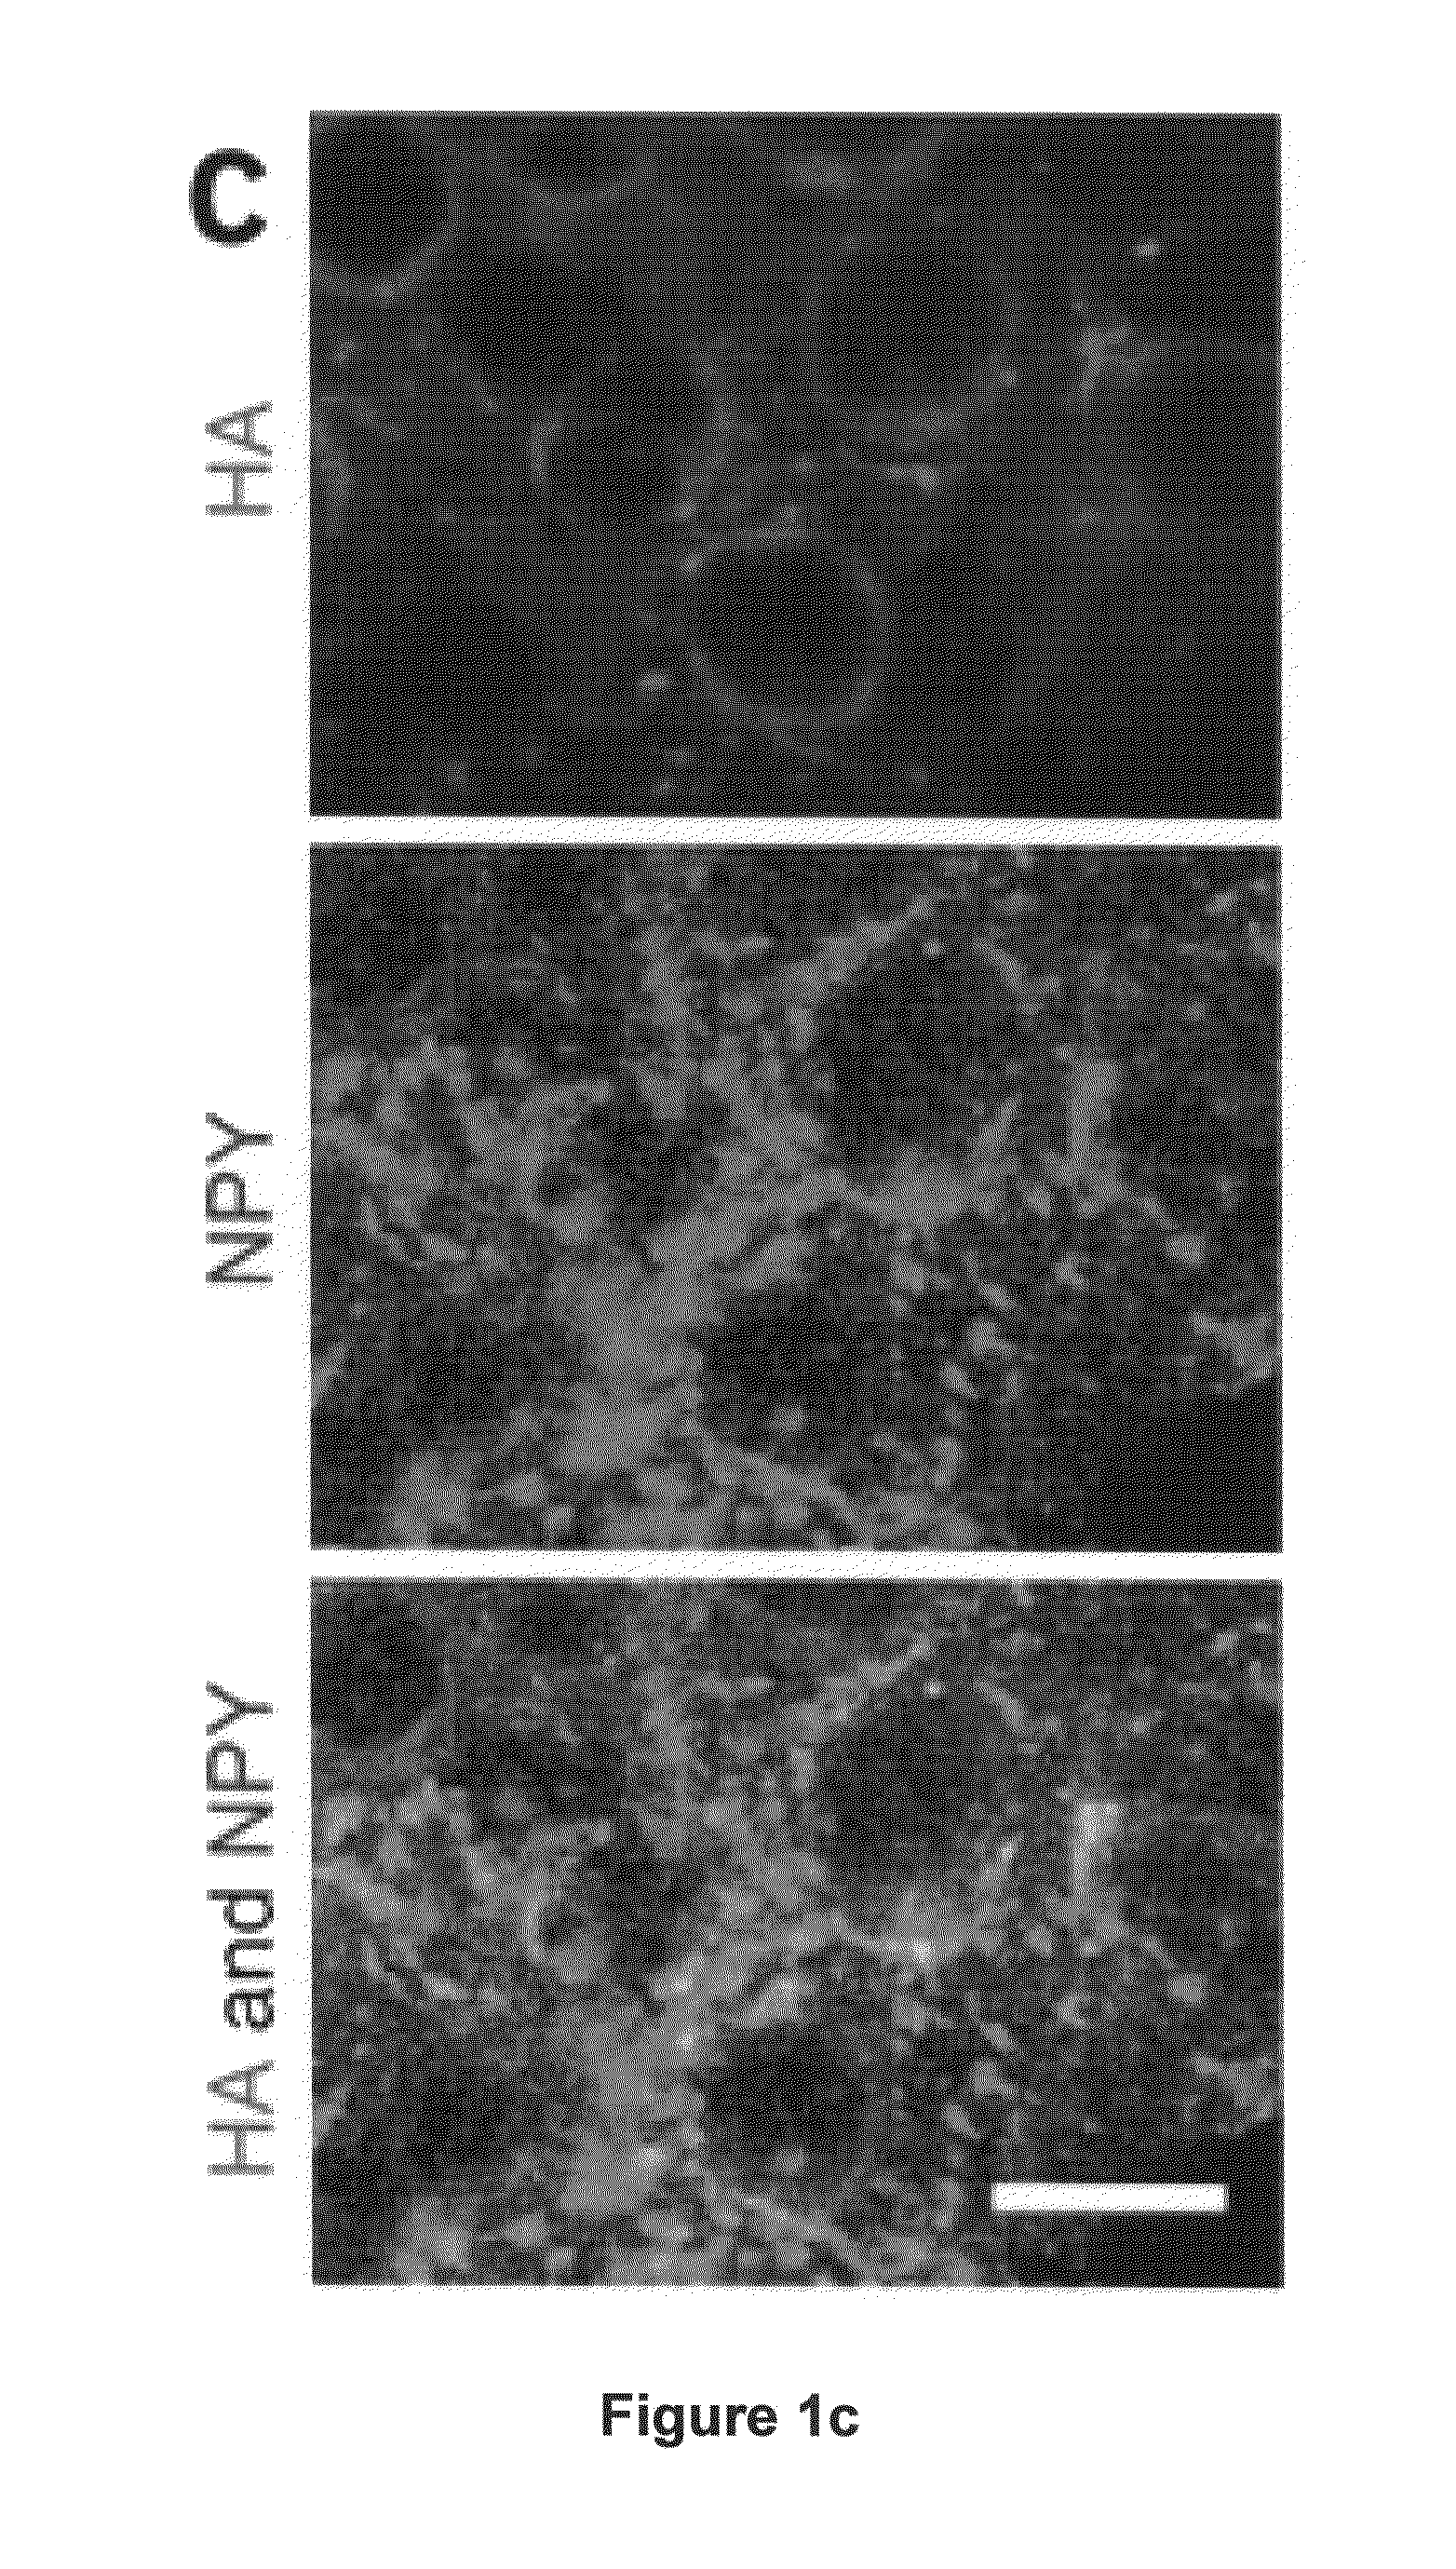 Treatment of Metabolic-Related Disorders Using Hypothalamic Gene Transfer of BDNF and Compositions Therefor